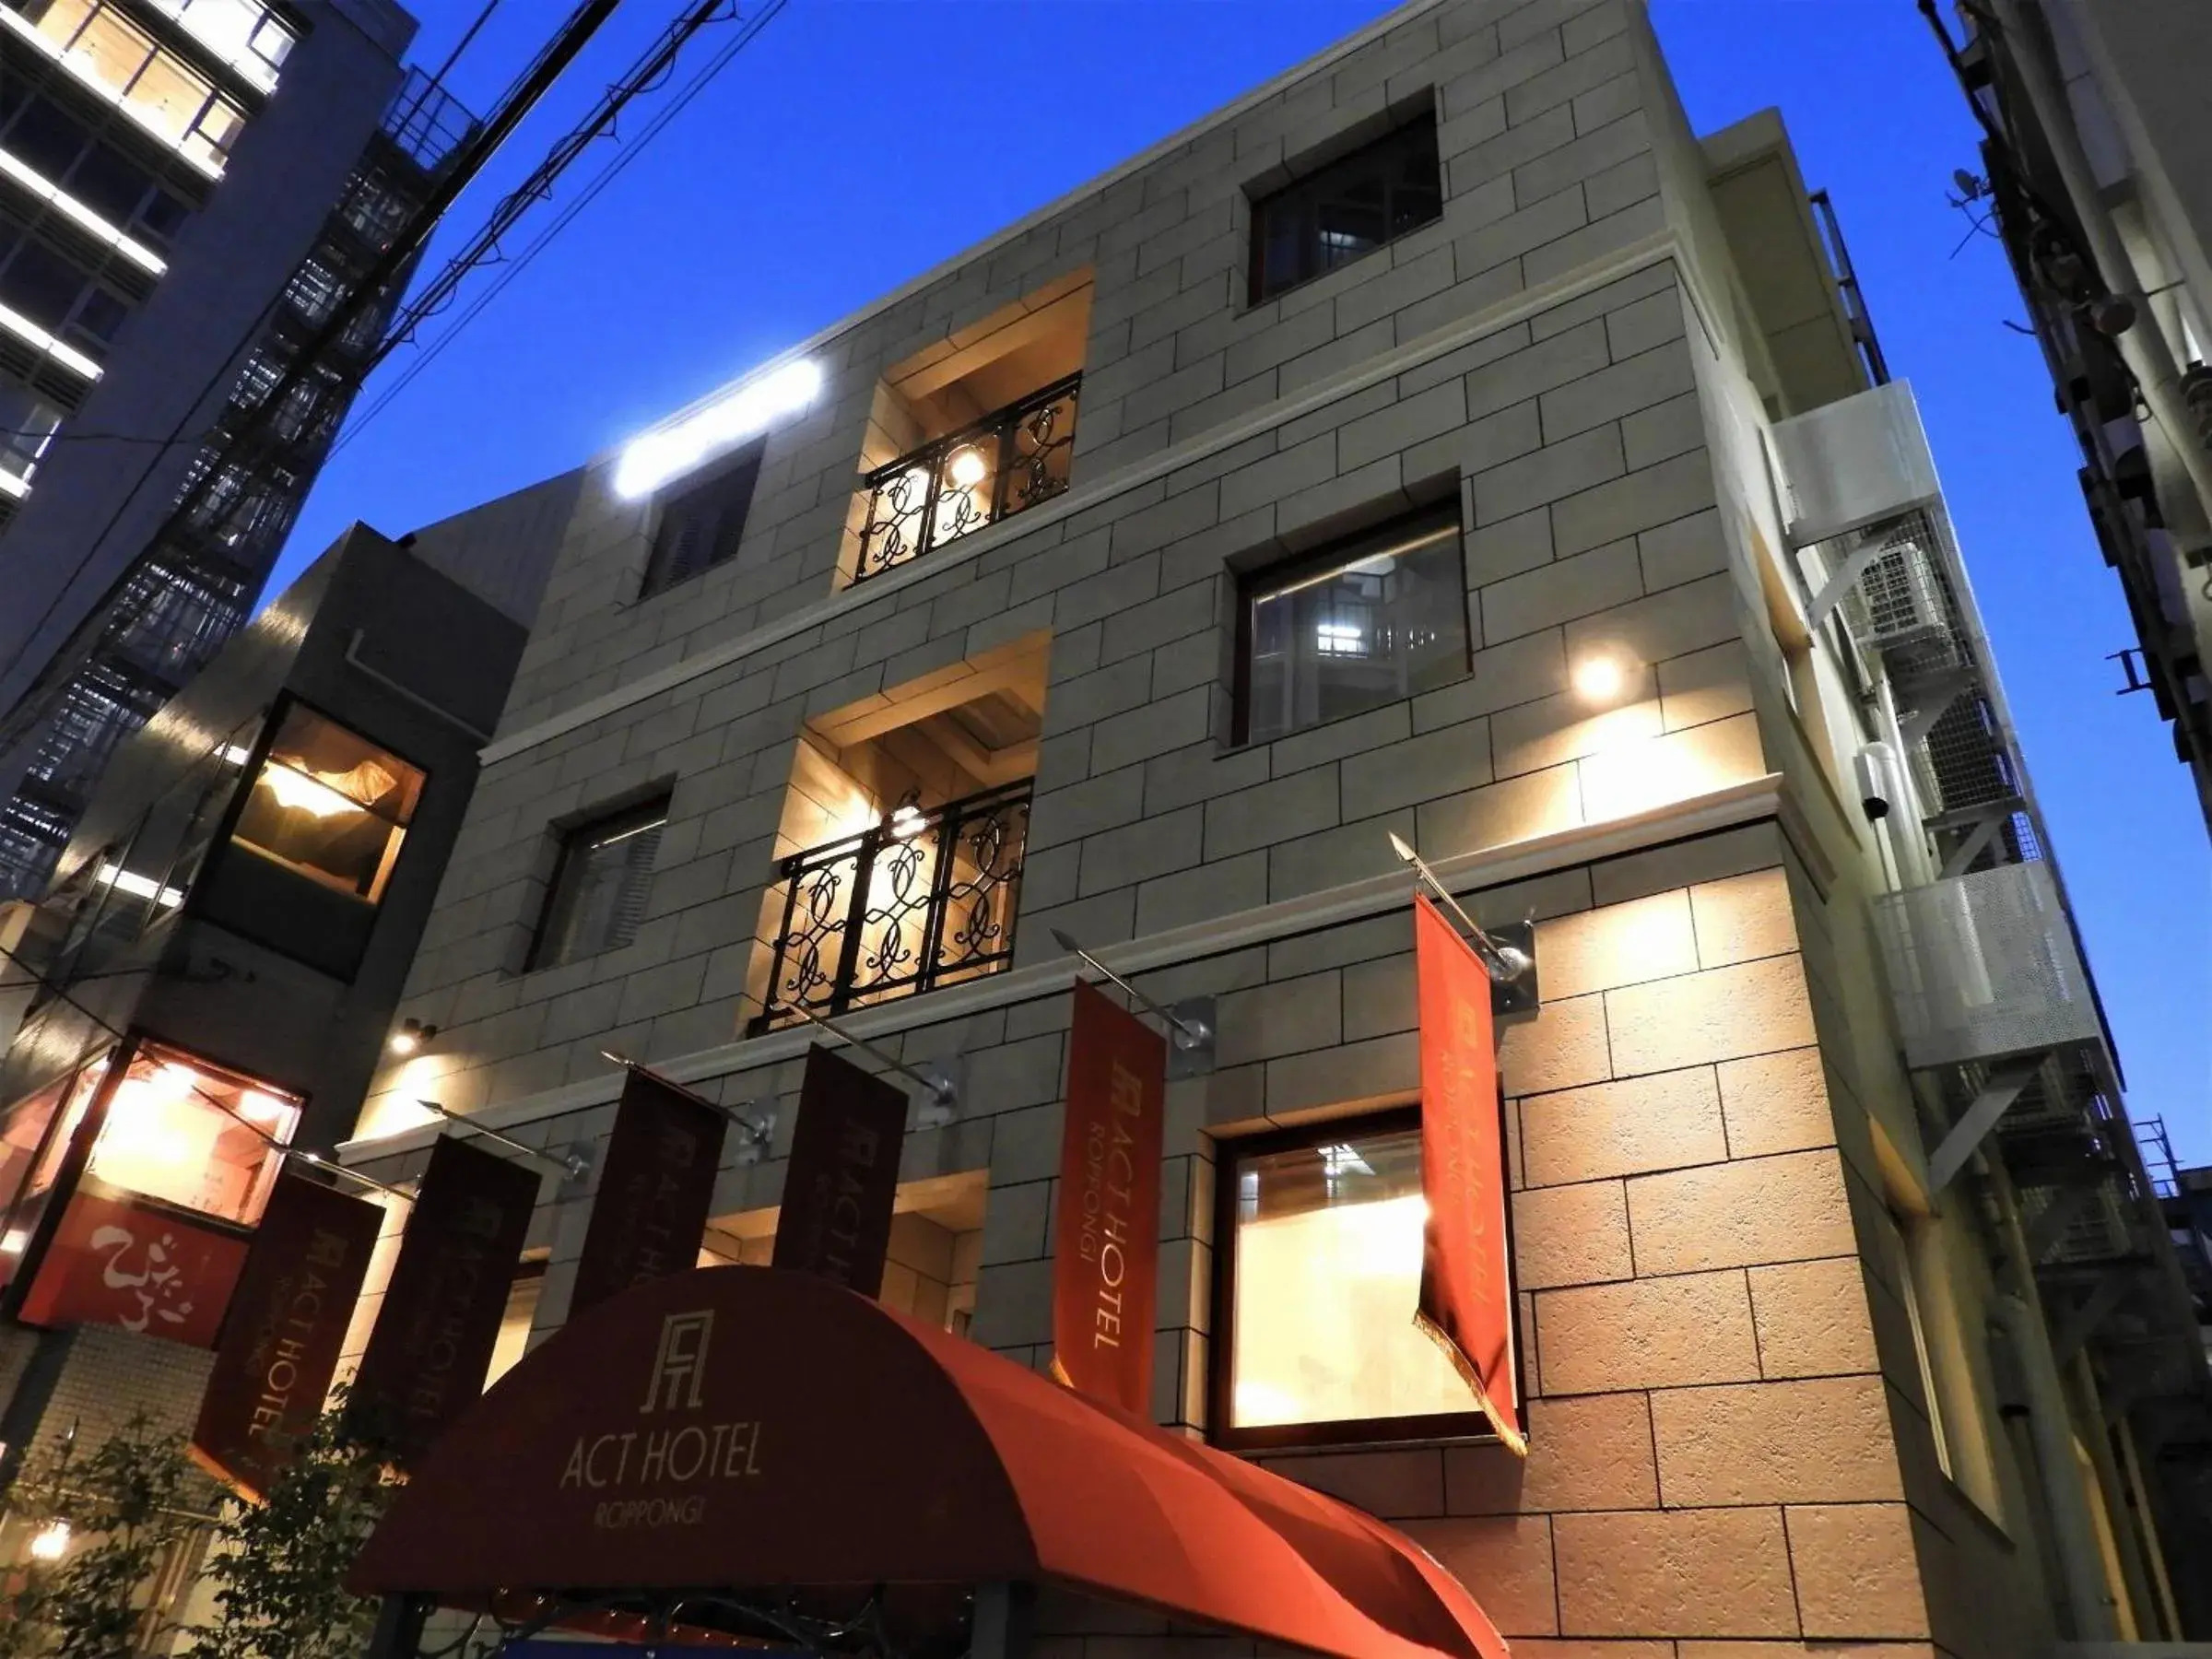 Property Building in Act Hotel Roppongi